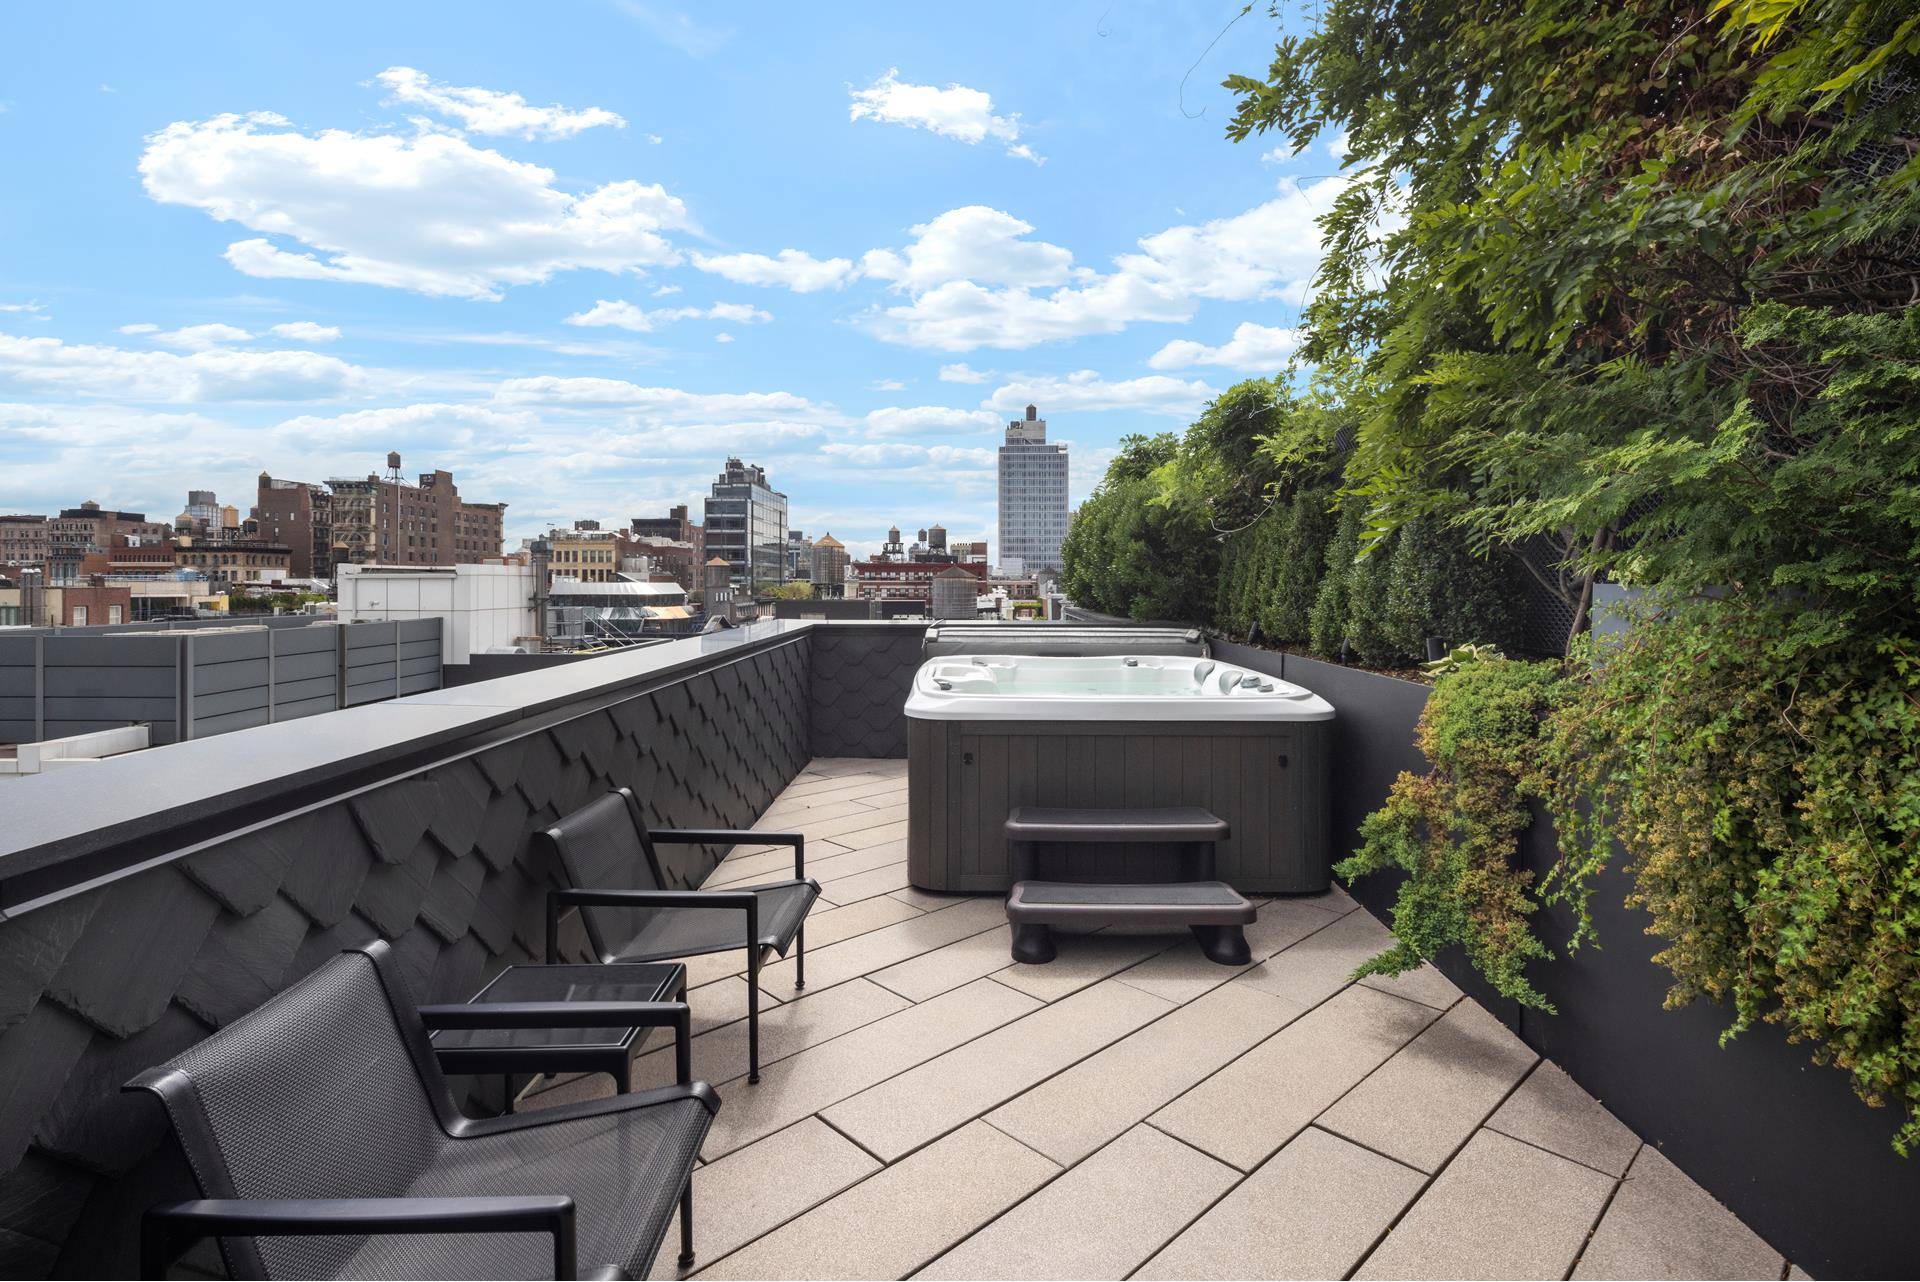 Super Mint SOHO Penthouse with Views and TerracesOffered for the first time and not to be missed, this custom renovated Penthouse has it all !